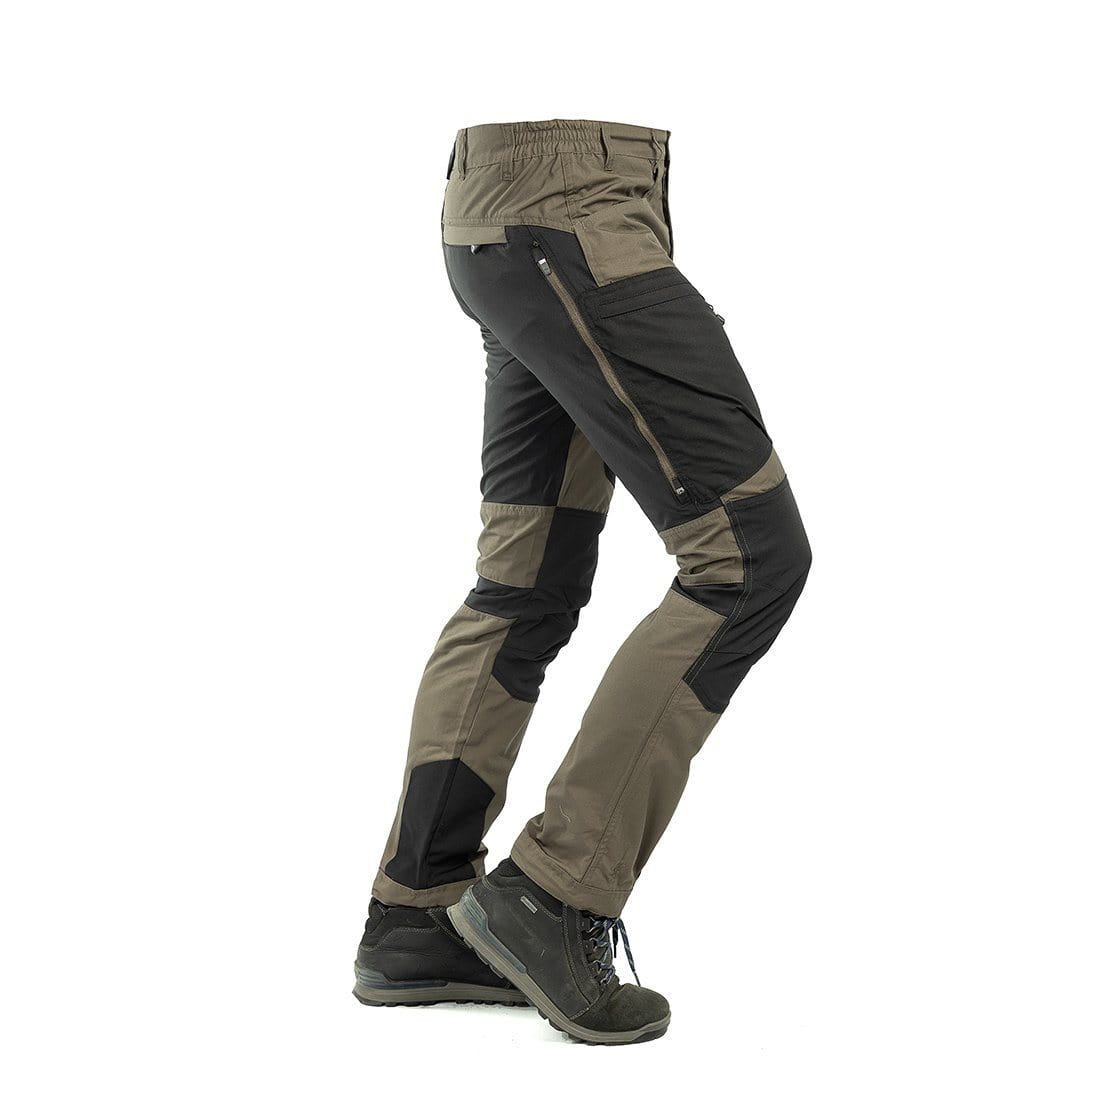 Buy ANTARCTICA Mens Tactical Hiking Pants Durable Lightweight Waterproof  Military Army Cargo Fishing Travel Online at Lowest Price Ever in India |  Check Reviews & Ratings - Shop The World